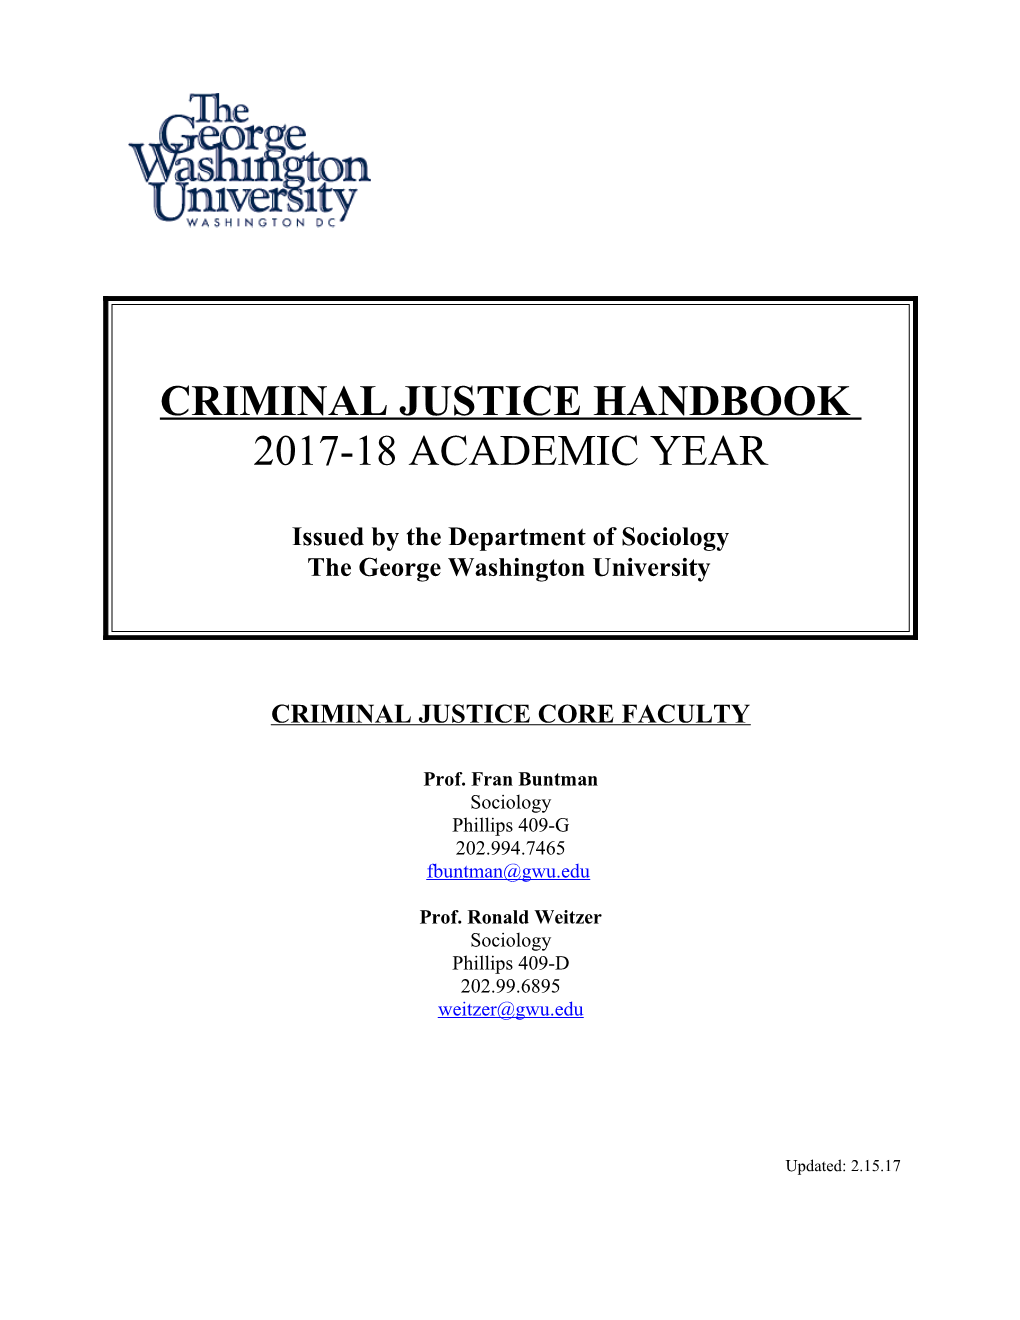 Criminal Justice Packet for the 1999-2000 Academic Year